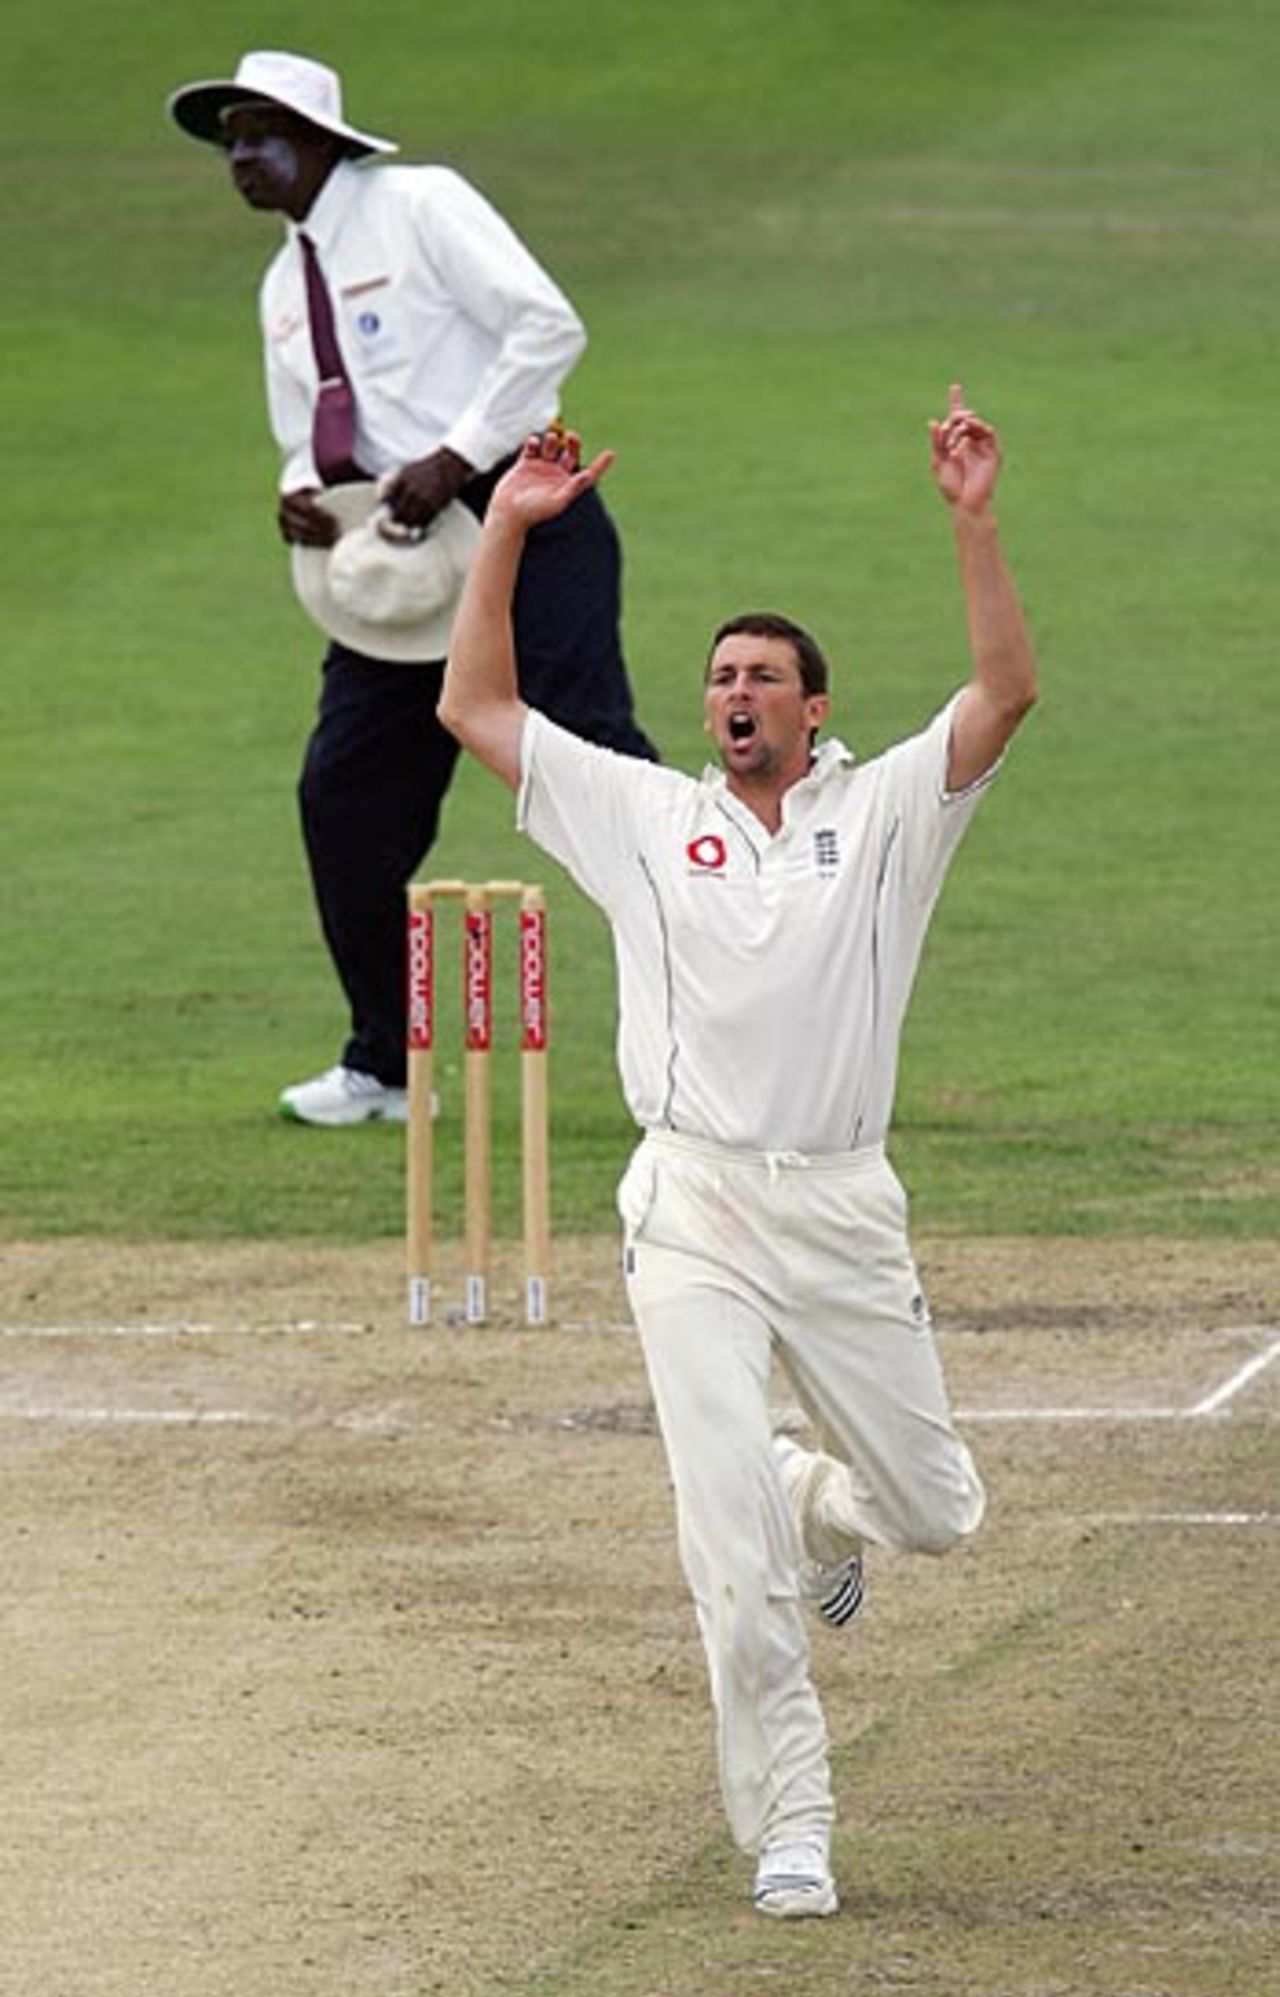 Steve Harmison throws his hands up in frustration as Younis Khan goes on the attack, England v Pakistan, 2nd Test, Old Trafford, July 29, 2006